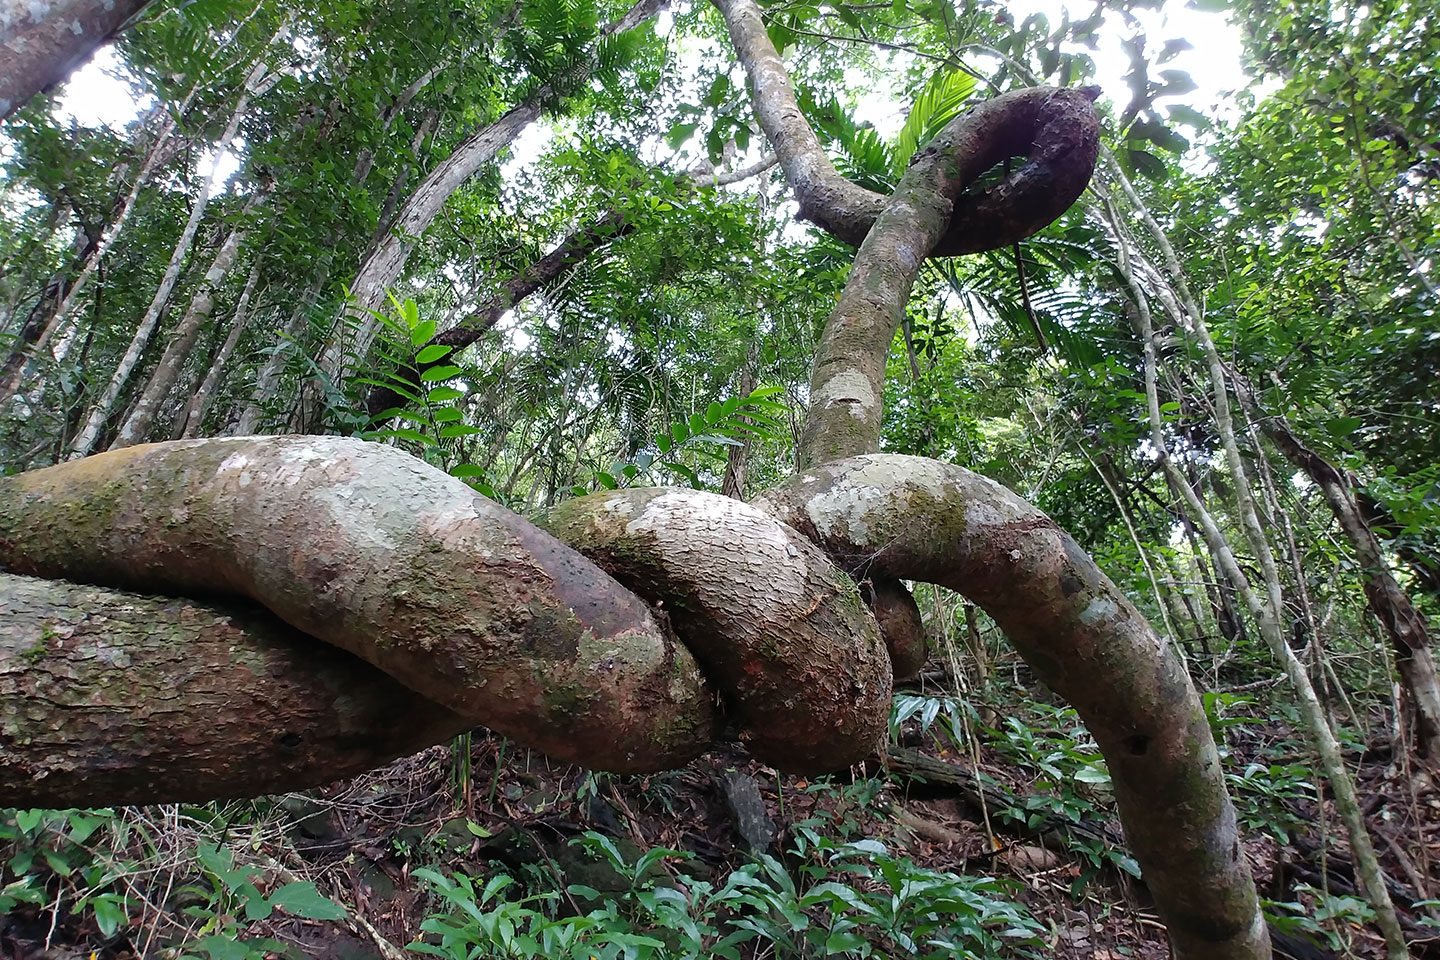 two huge lianas twist around each other horizontally across the image and then up into the canopy